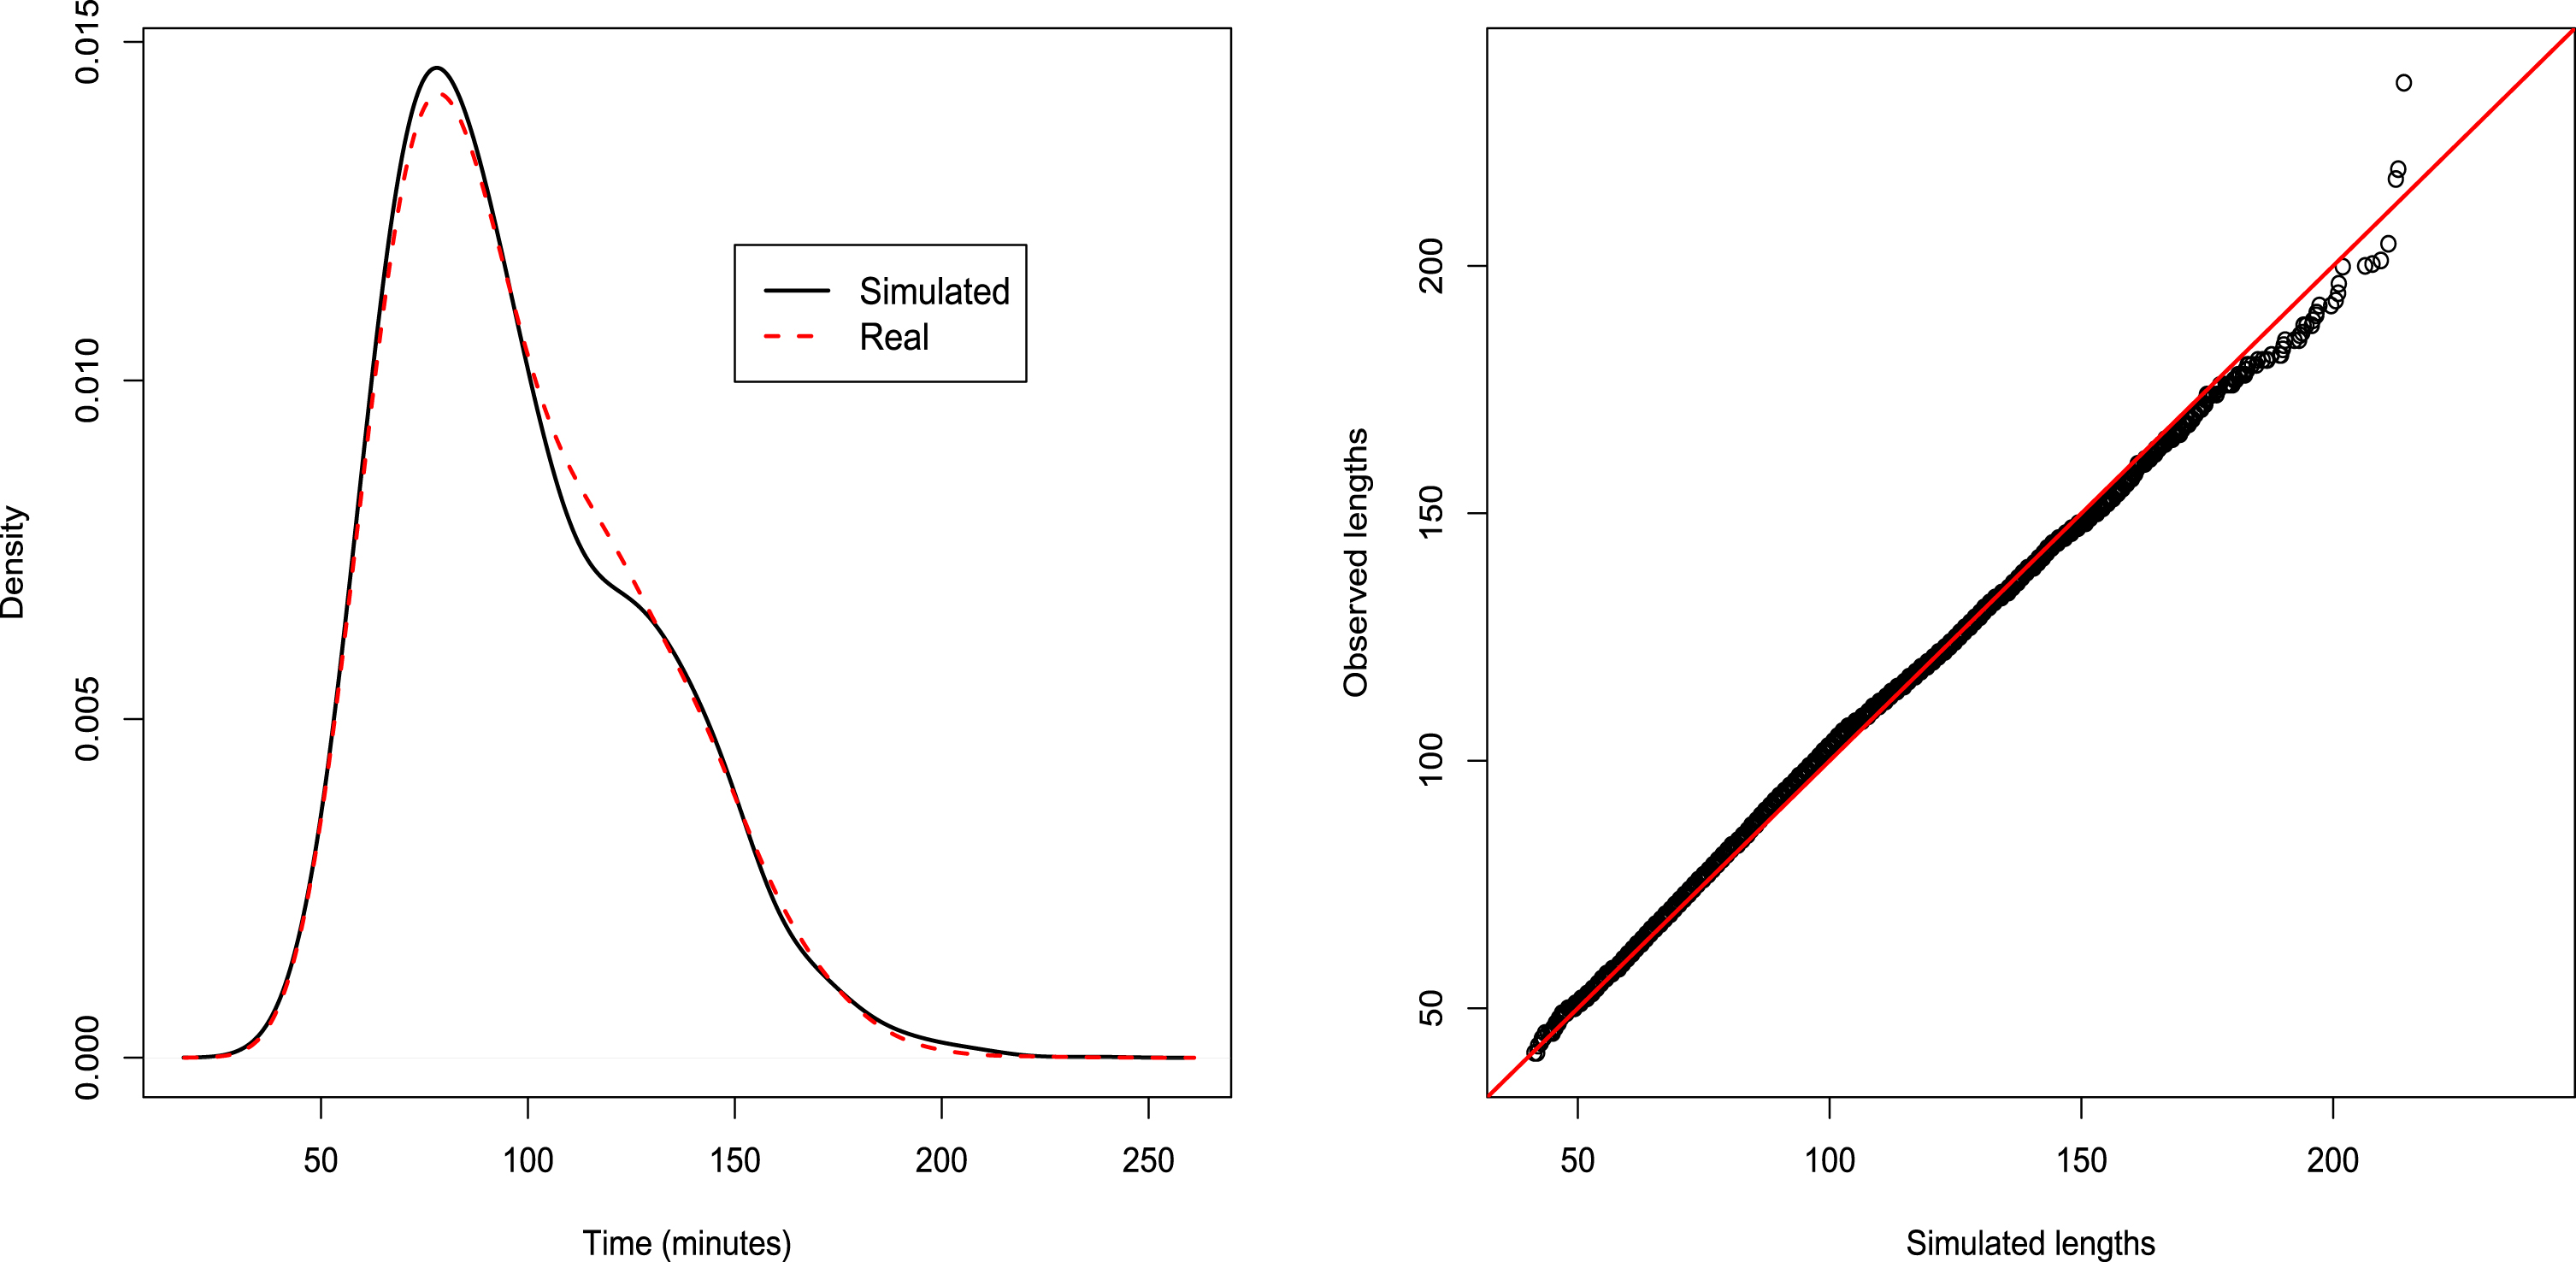 Best of 3: distributions and QQ-plots. Tests’ p-values: KS=0.08, AD=0.33, FP=0.54.